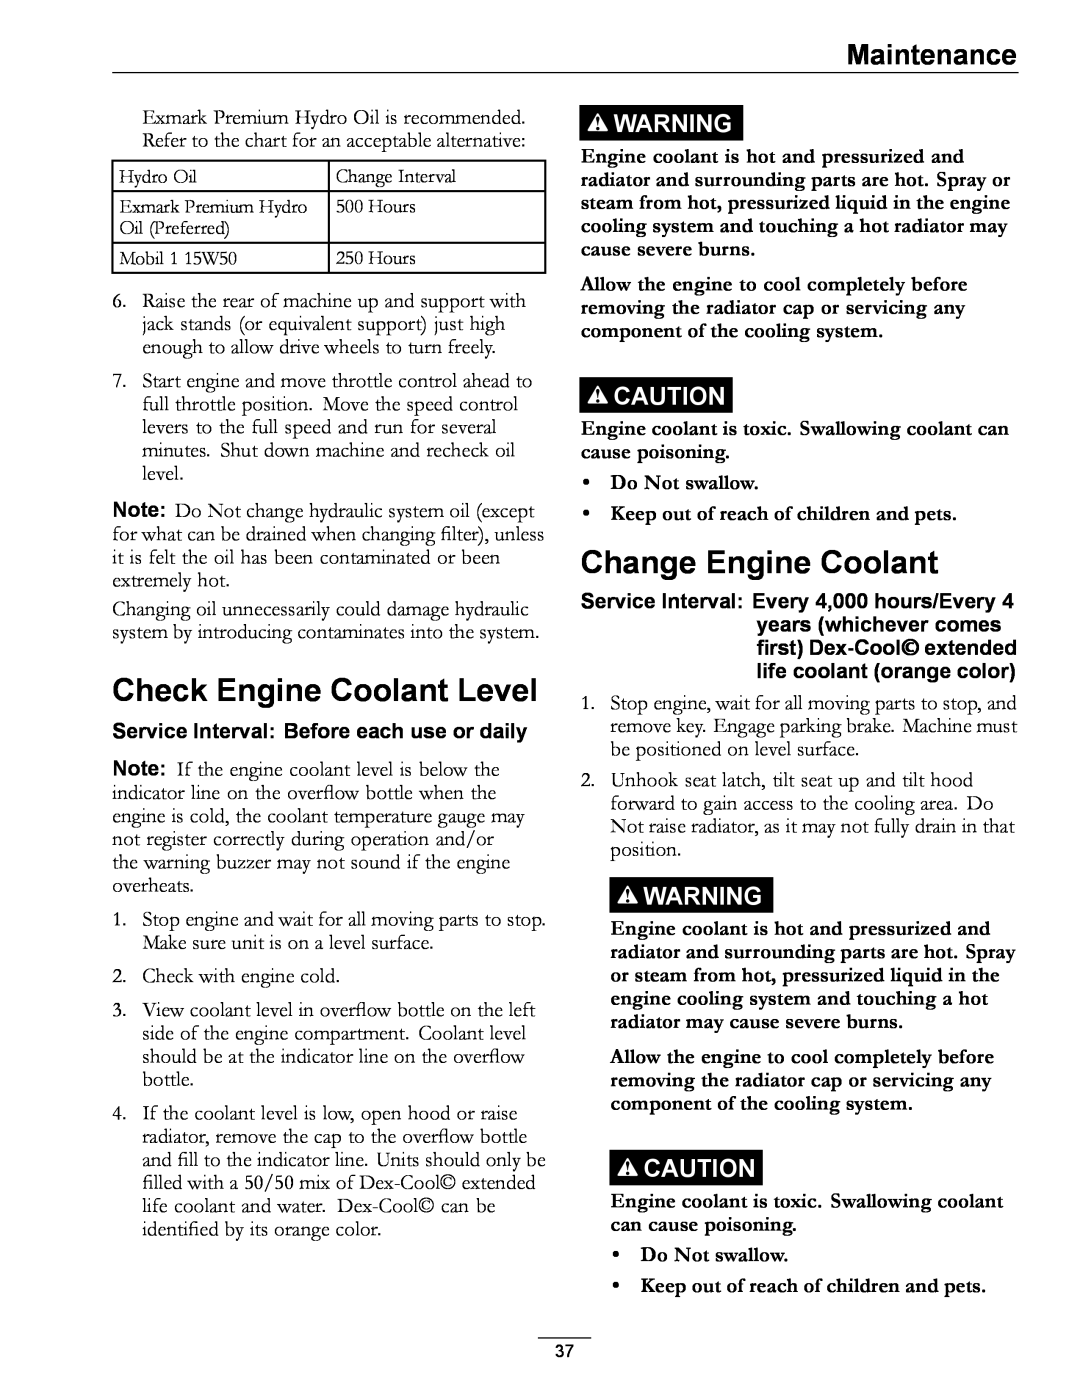 Exmark 920 Check Engine Coolant Level, Change Engine Coolant, Do Not swallow Keep out of reach of children and pets 